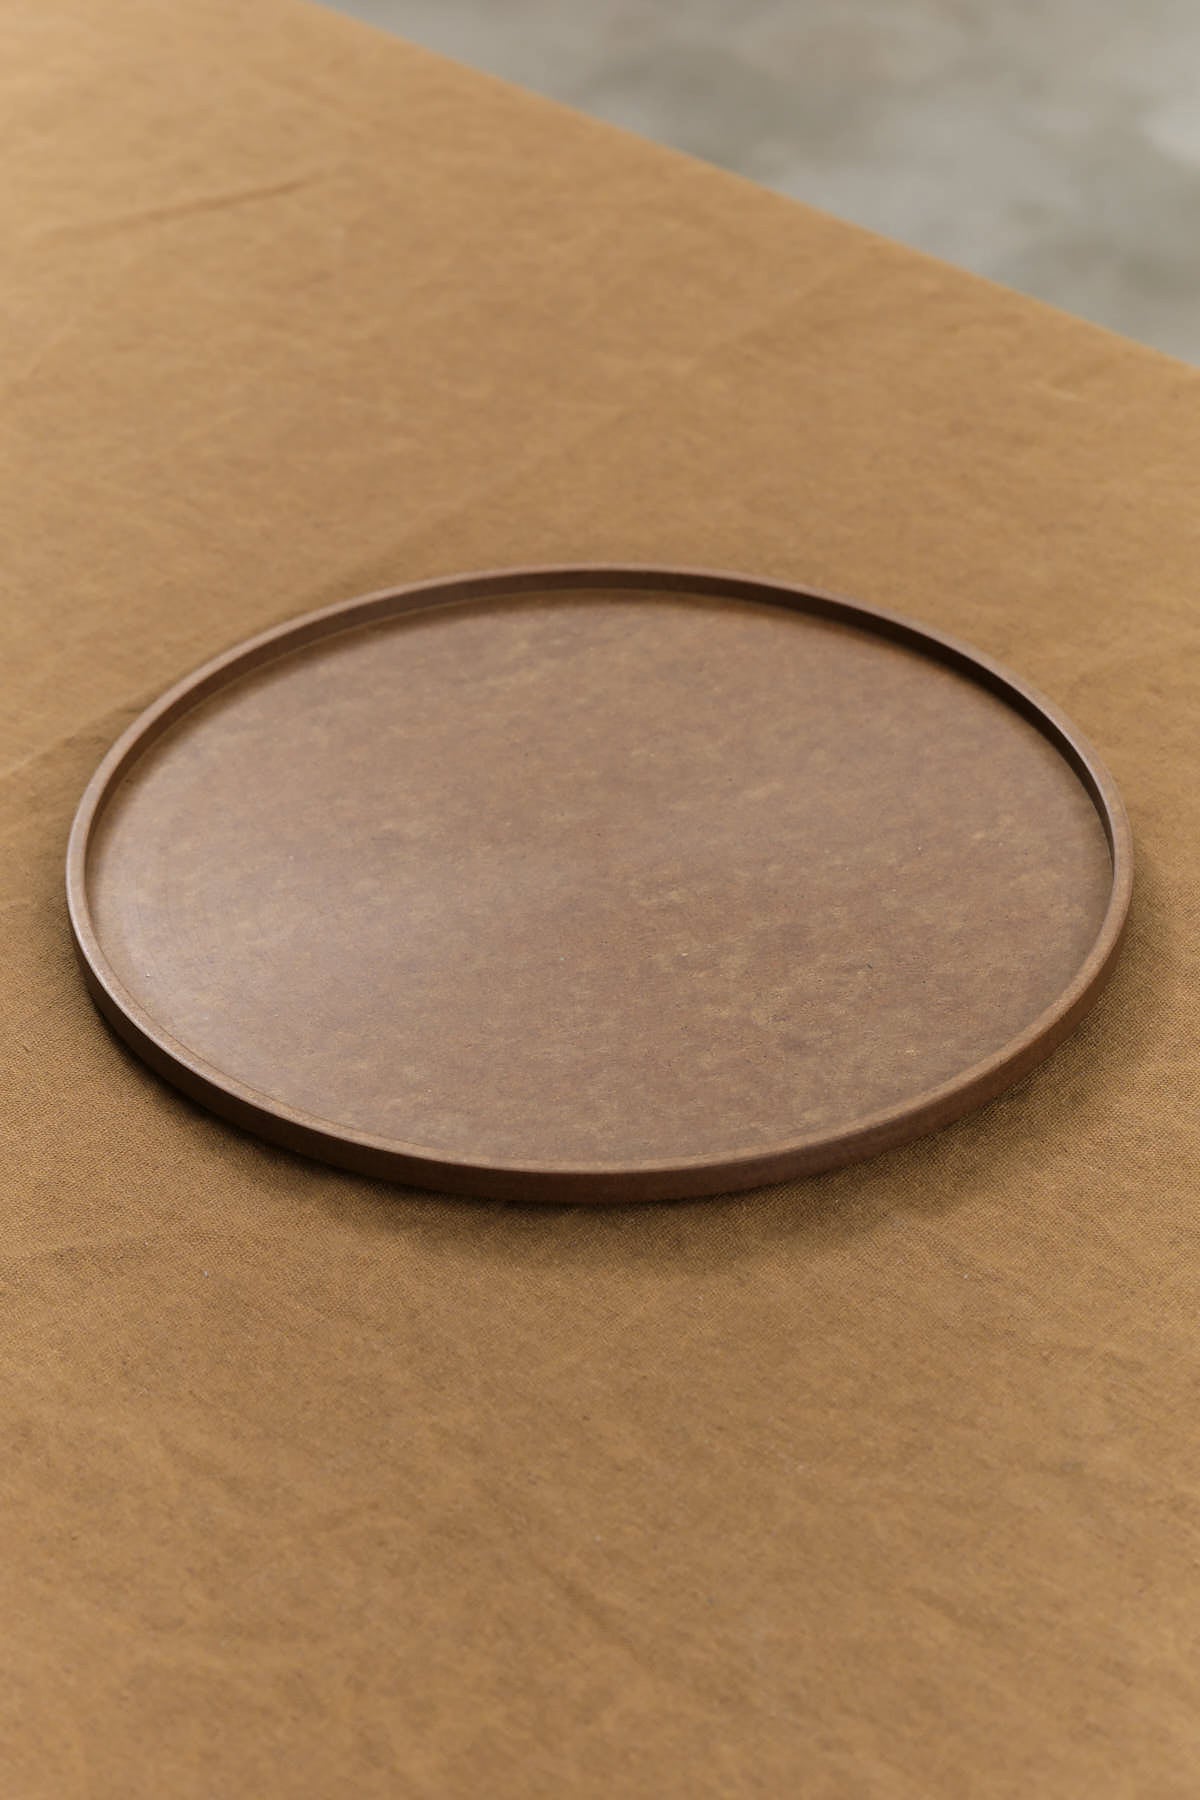 Top view of Large Richlite Tray in Dark Brown